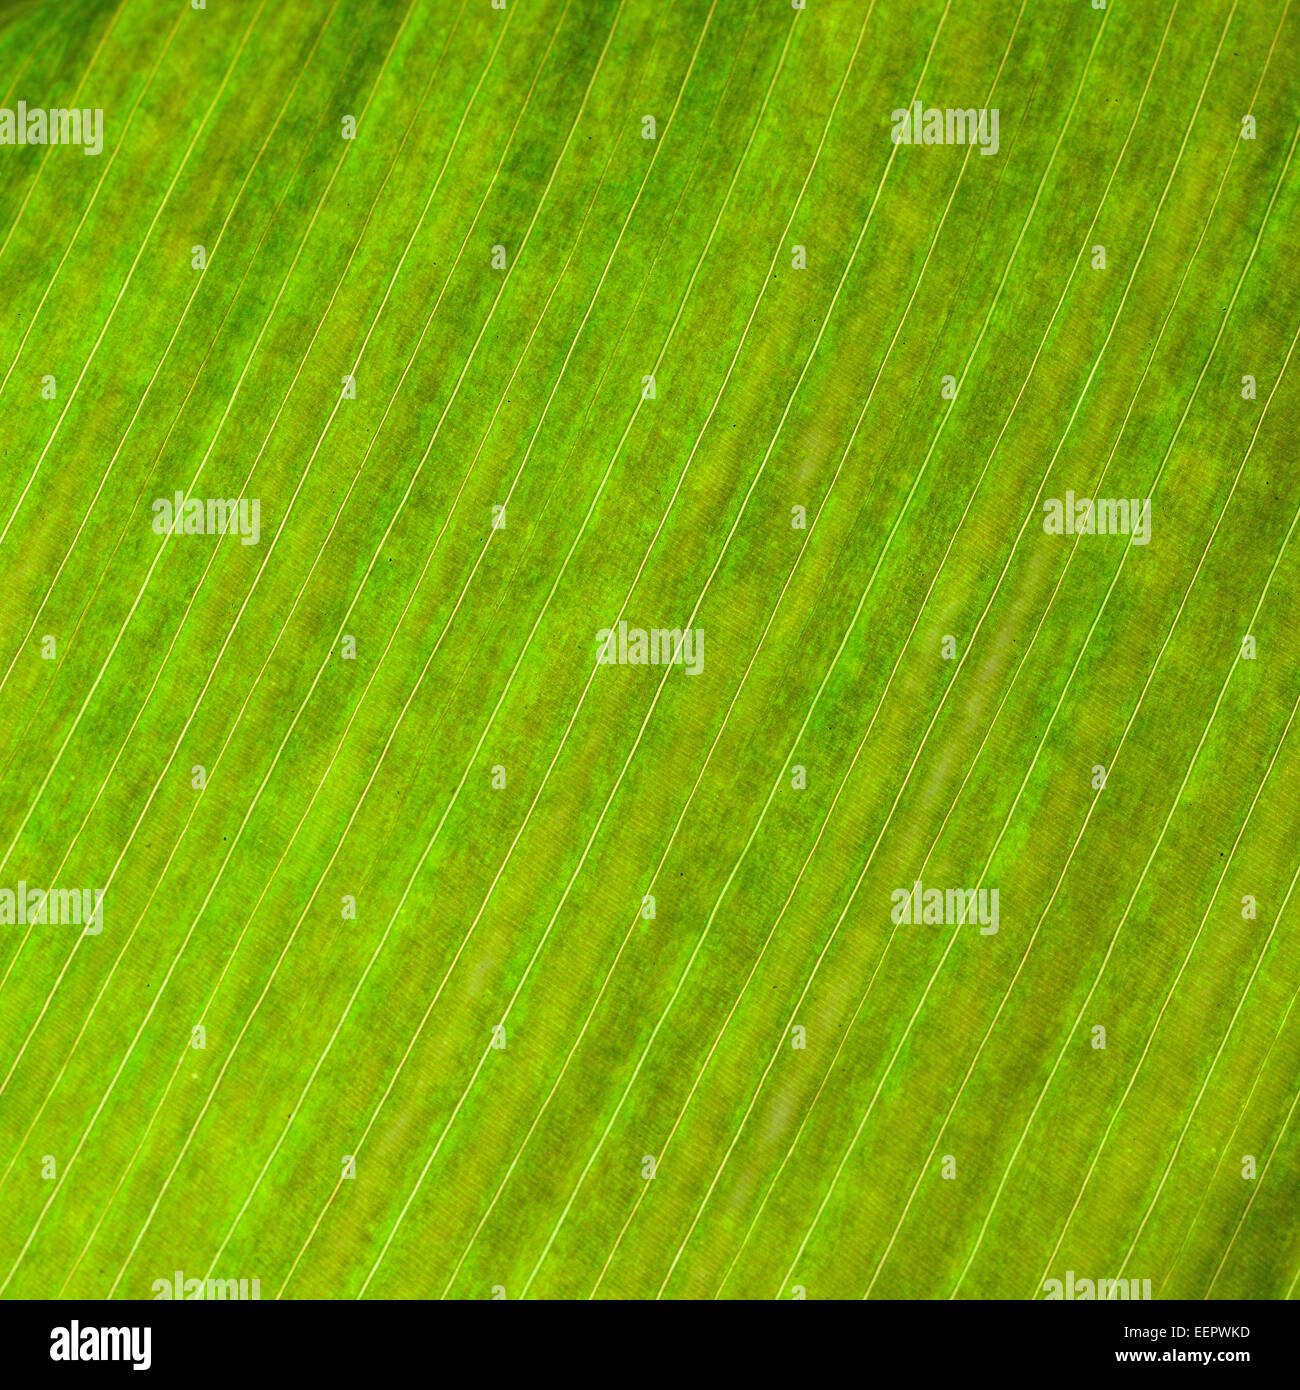 Green leaf abstract background texture Stock Photo